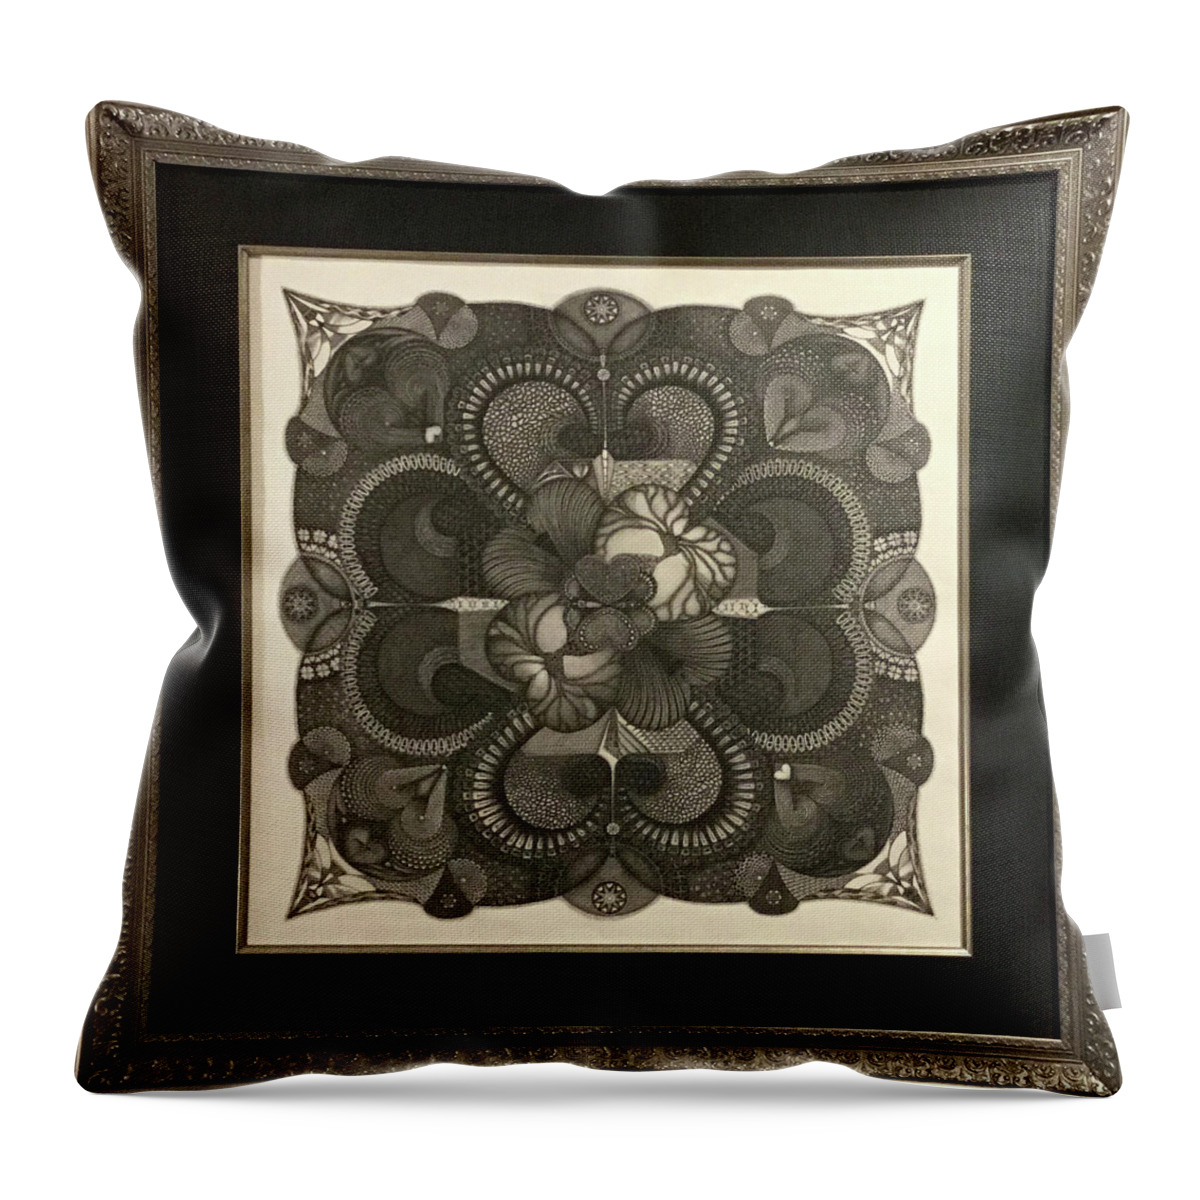  Throw Pillow featuring the drawing Heart To Heart by James Lanigan Thompson MFA